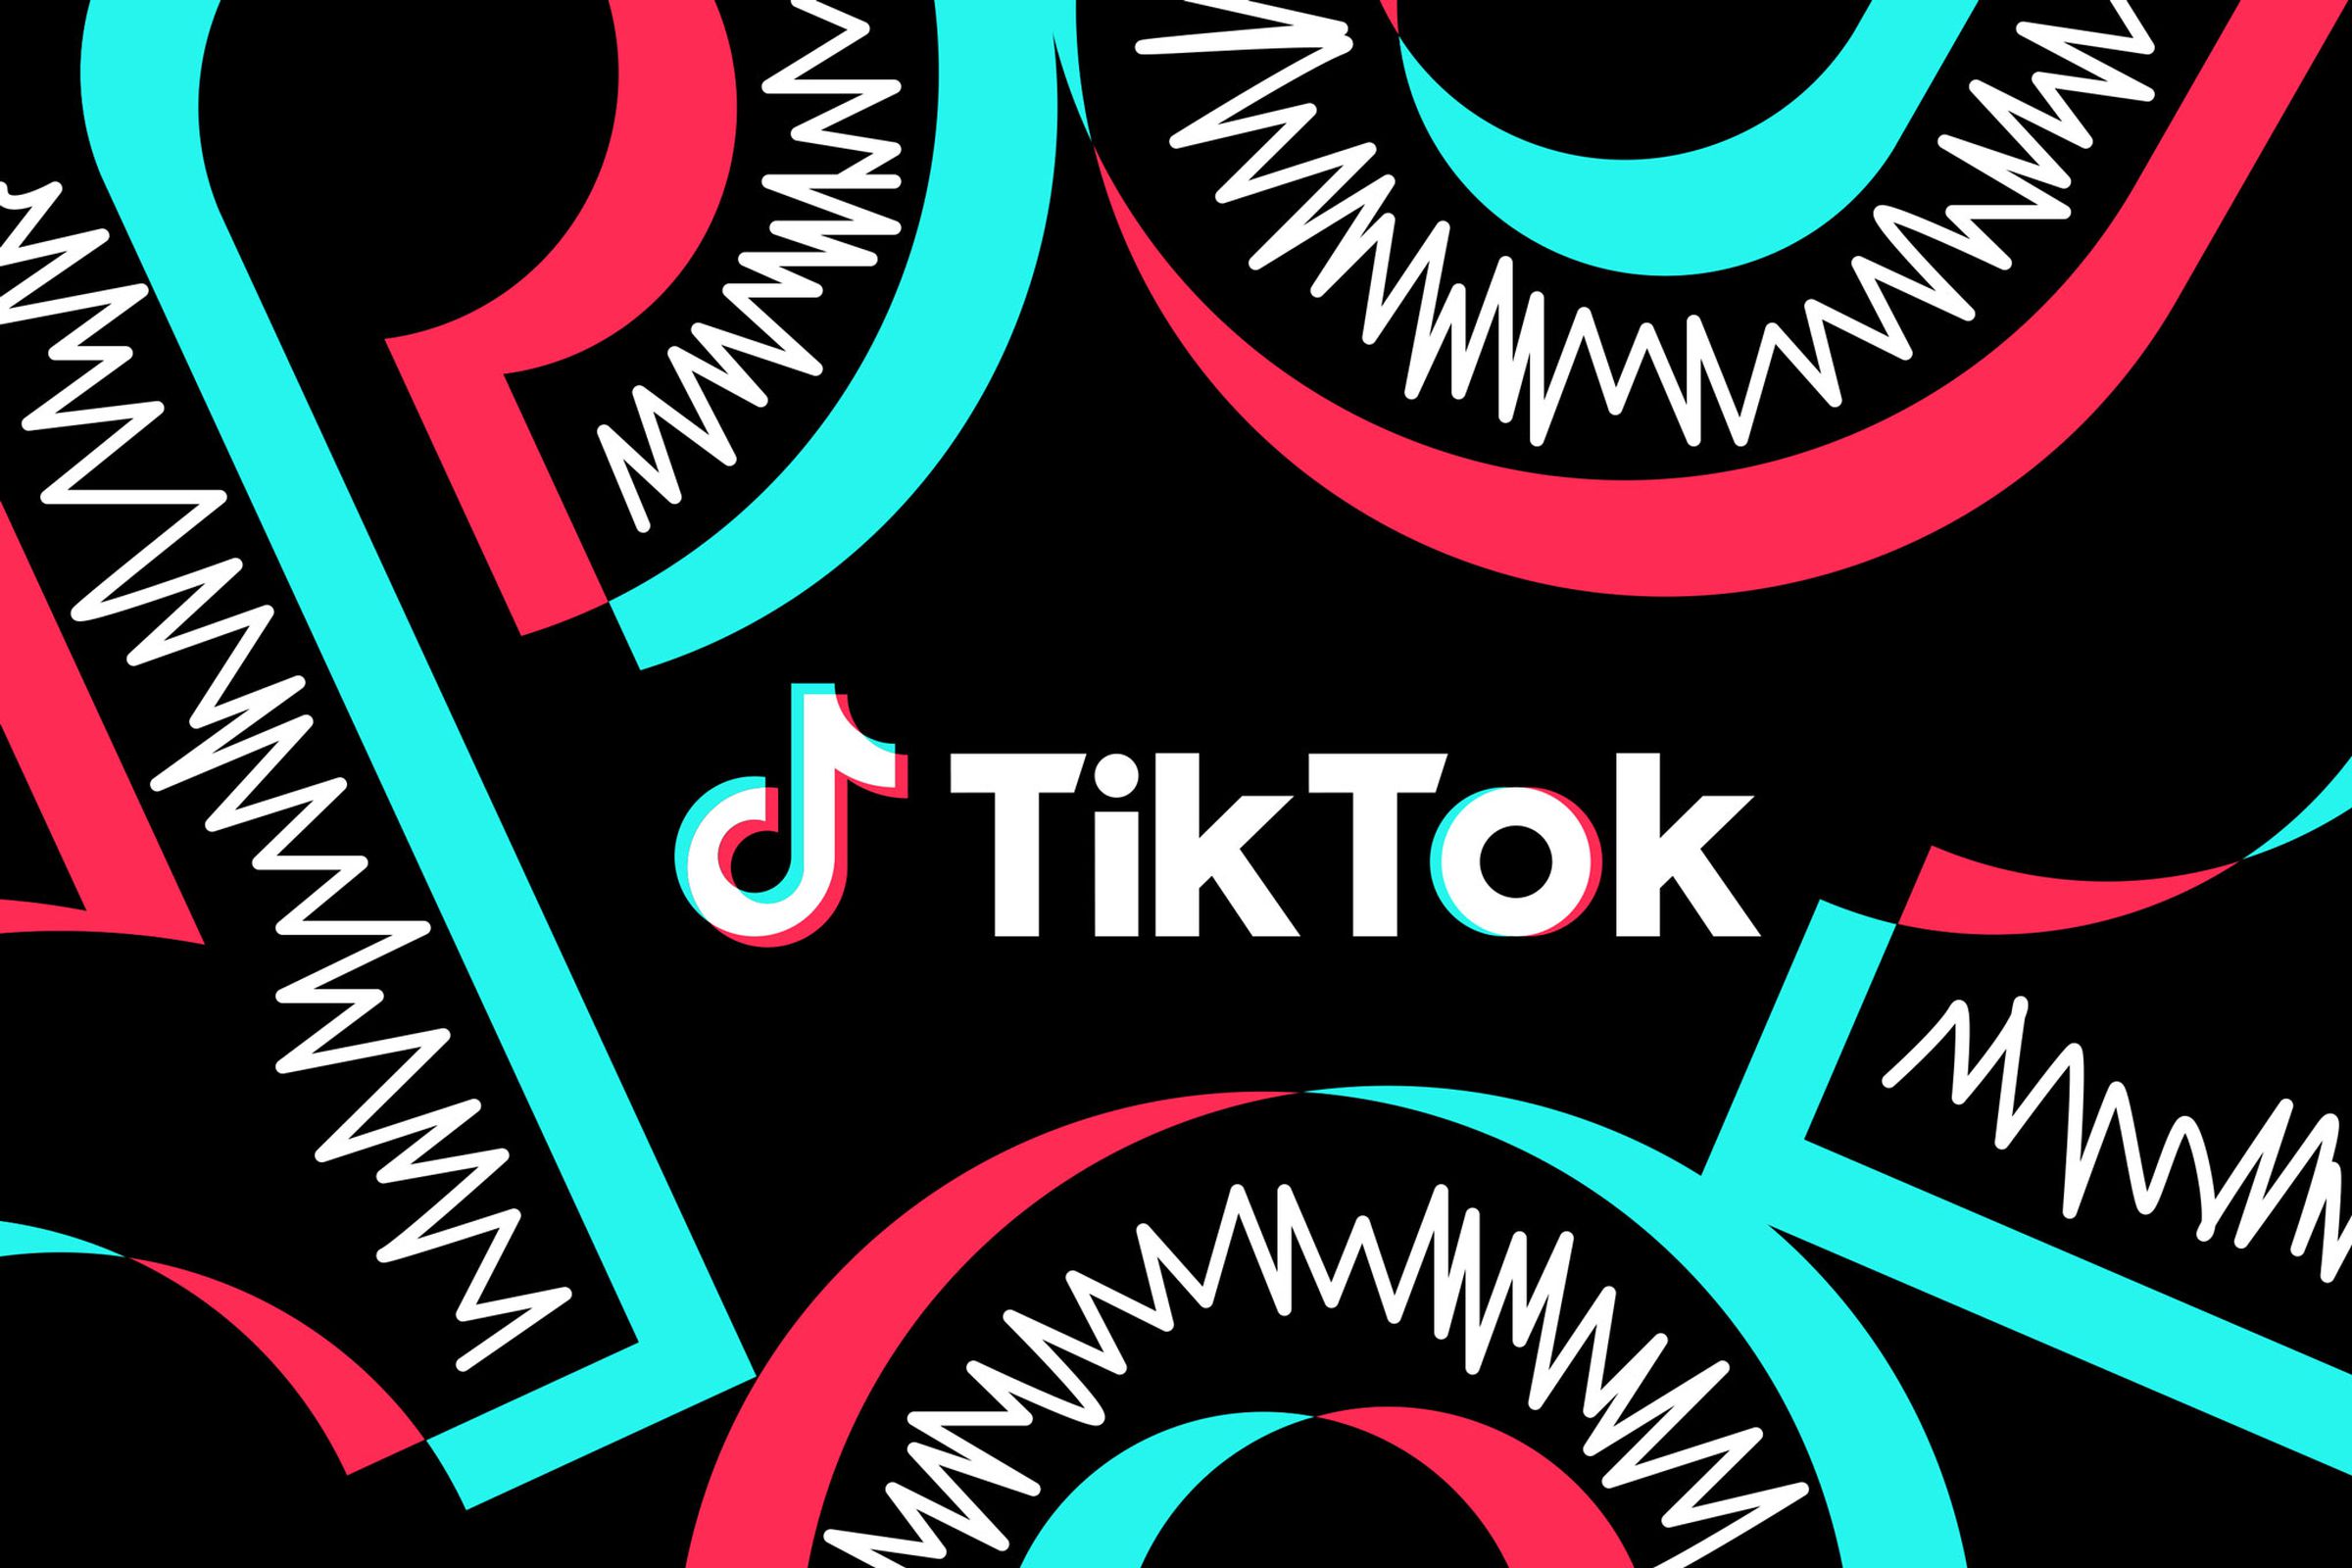 Apple and Google face mounting pressure to remove TikTok from app stores